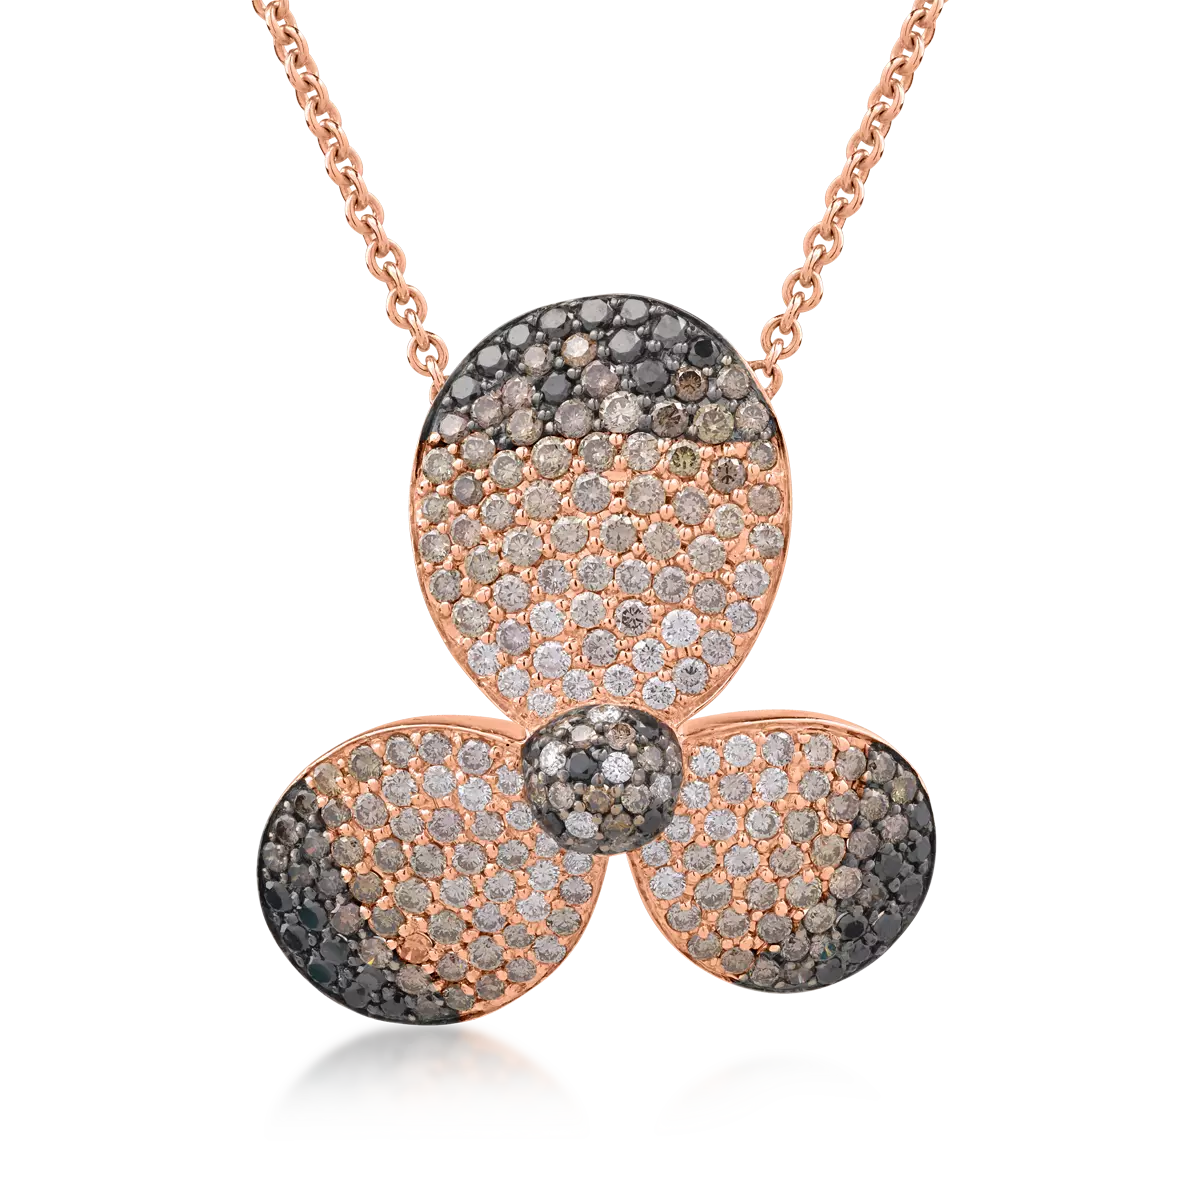 18K rose gold pendant necklace with 3.44ct colored diamonds